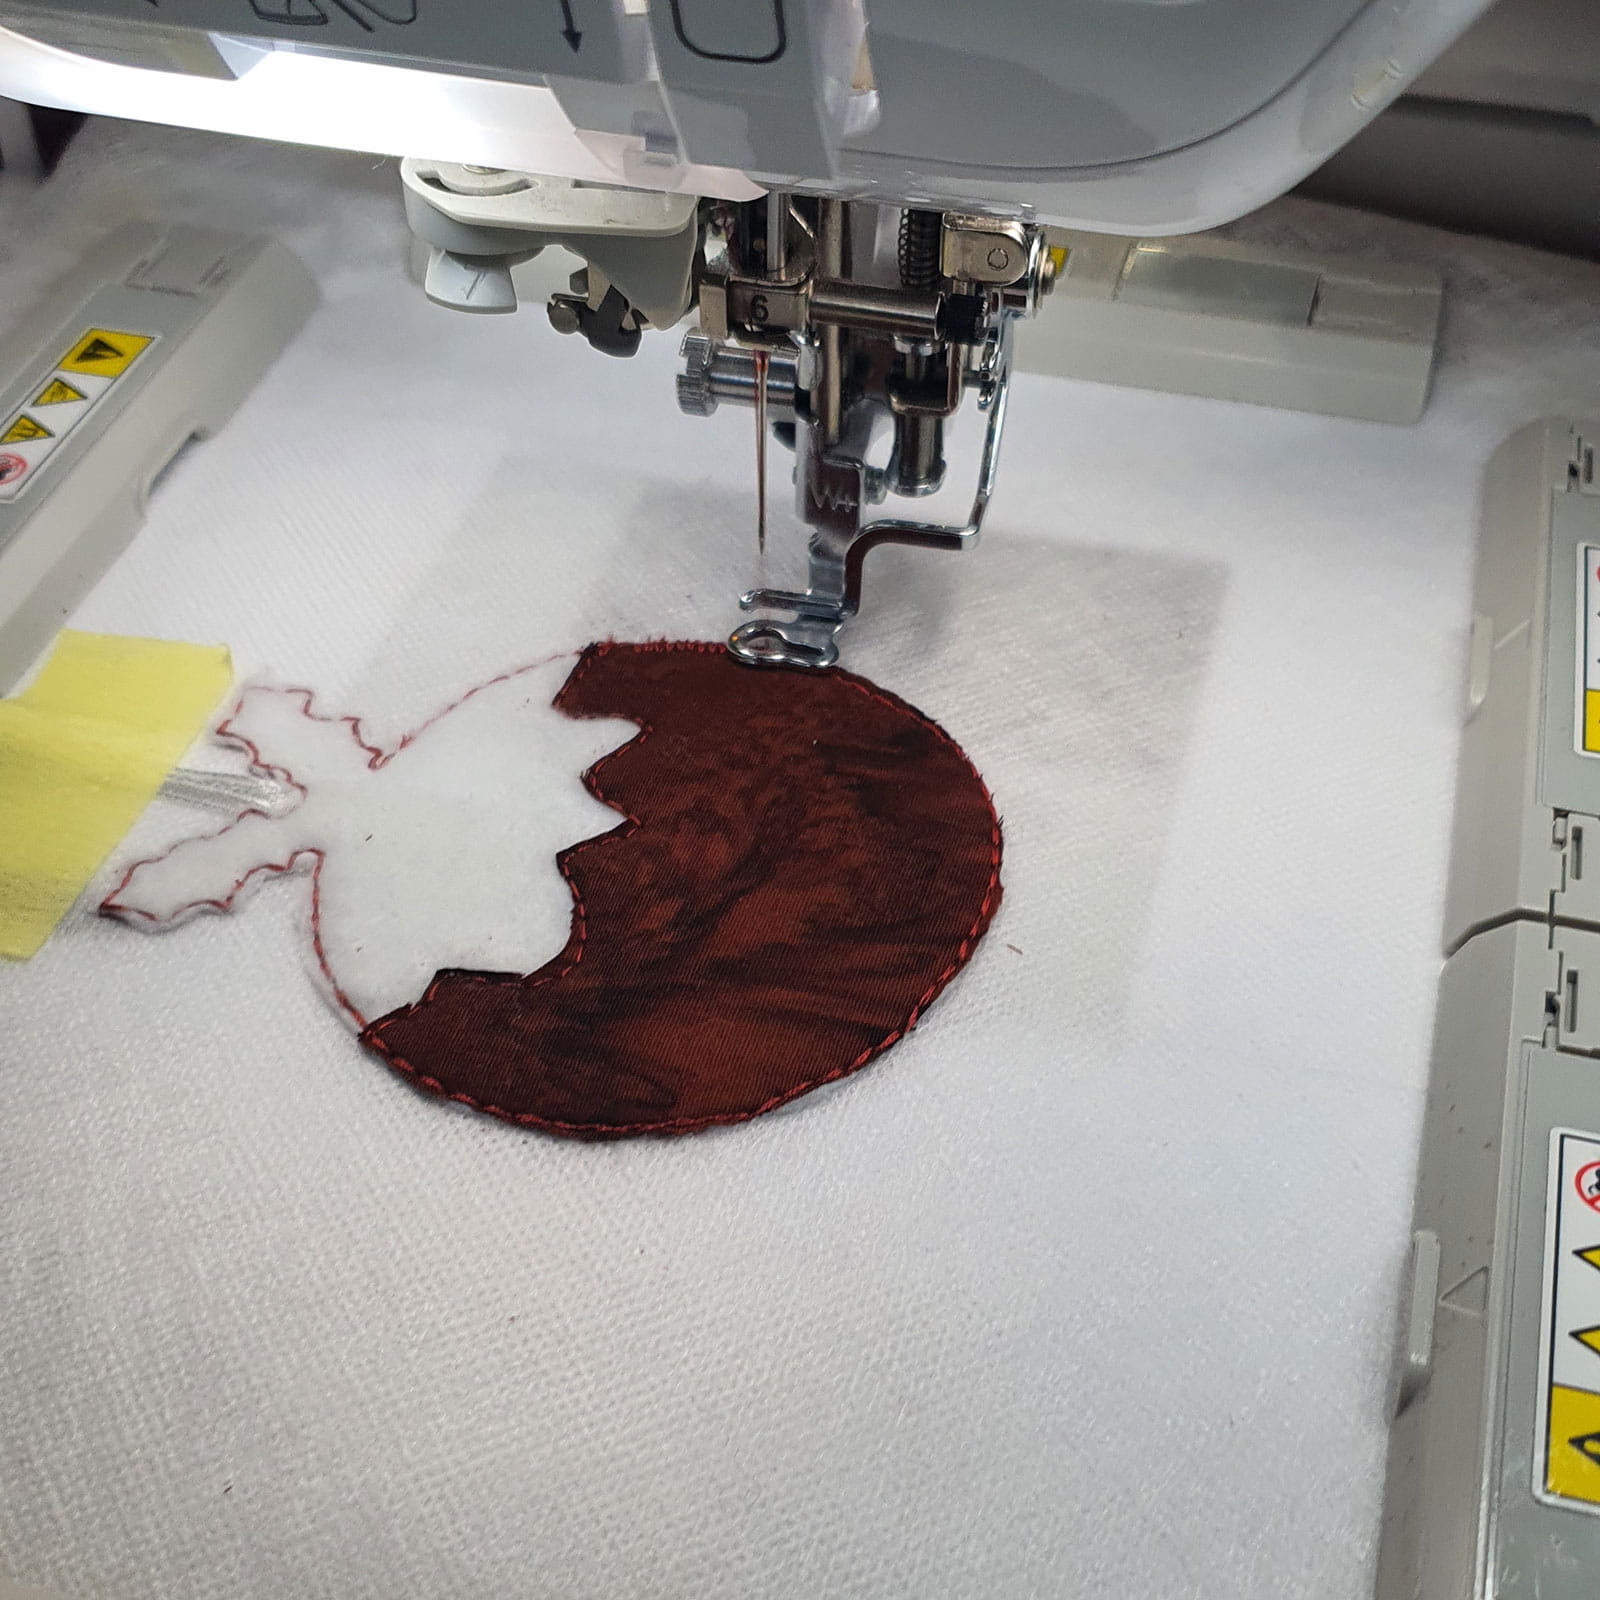 Christmas pudding shape in embroidery machine